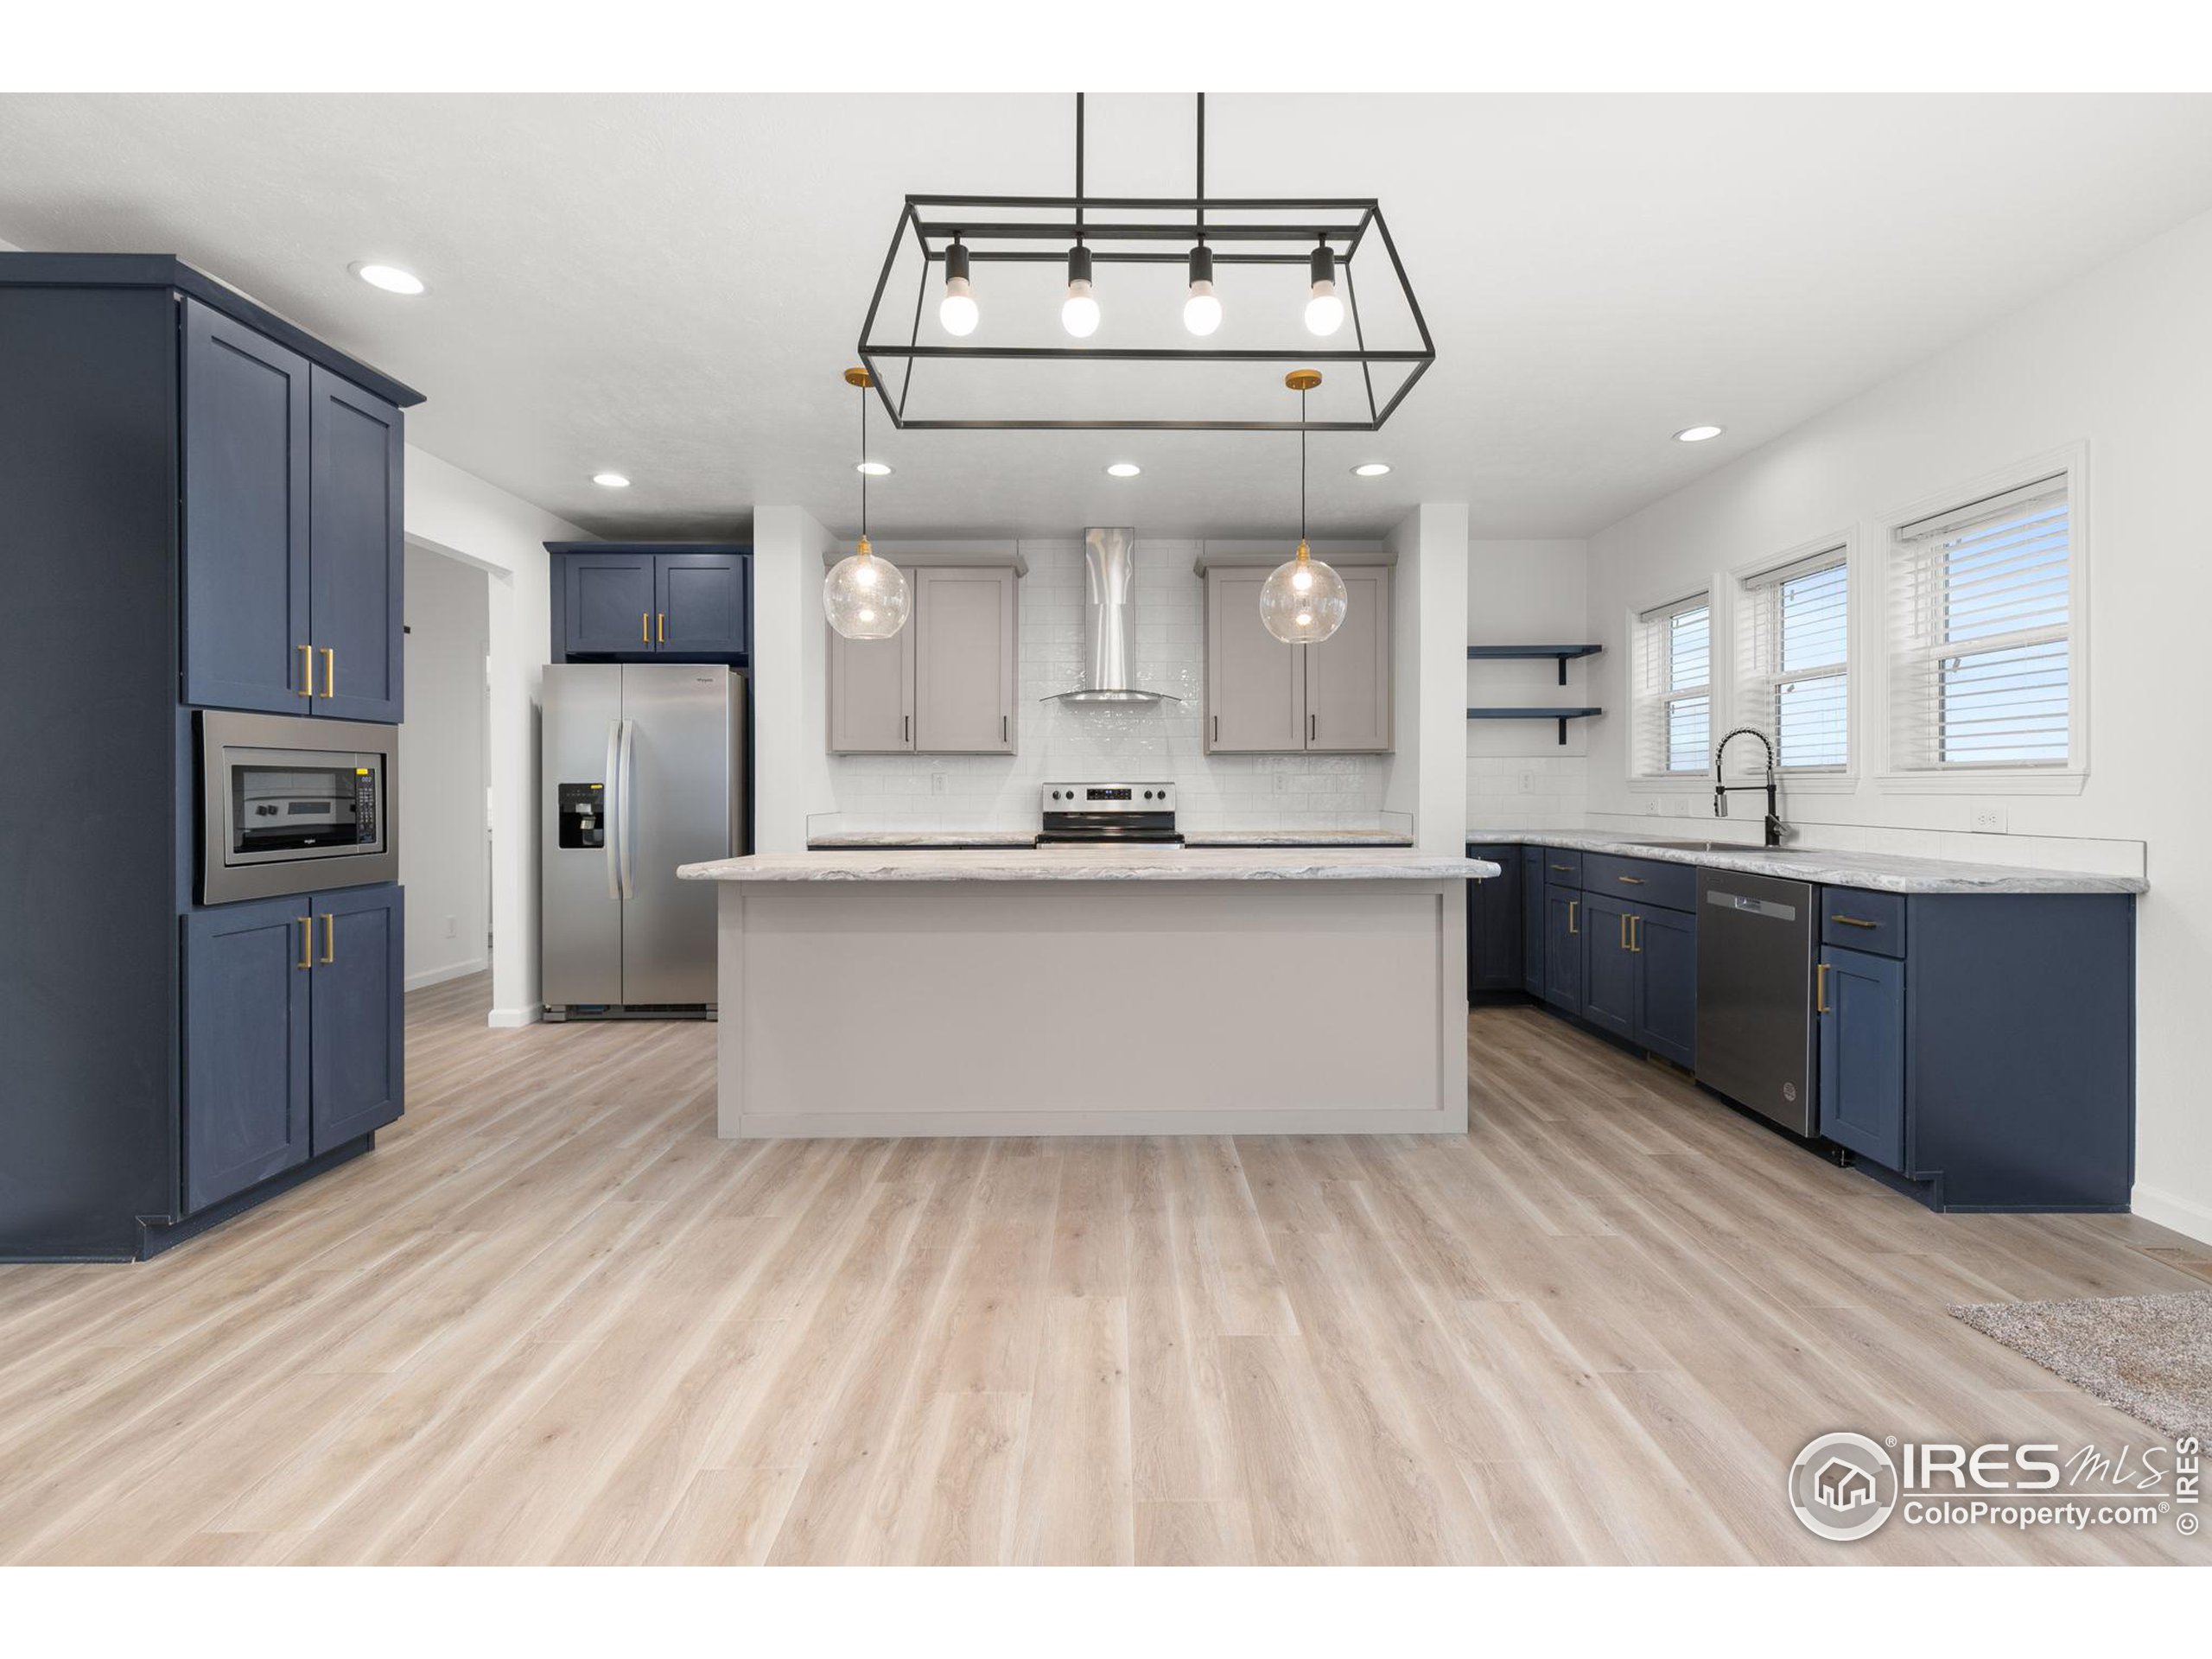 a large kitchen with stainless steel appliances kitchen island a large counter space and wooden floor